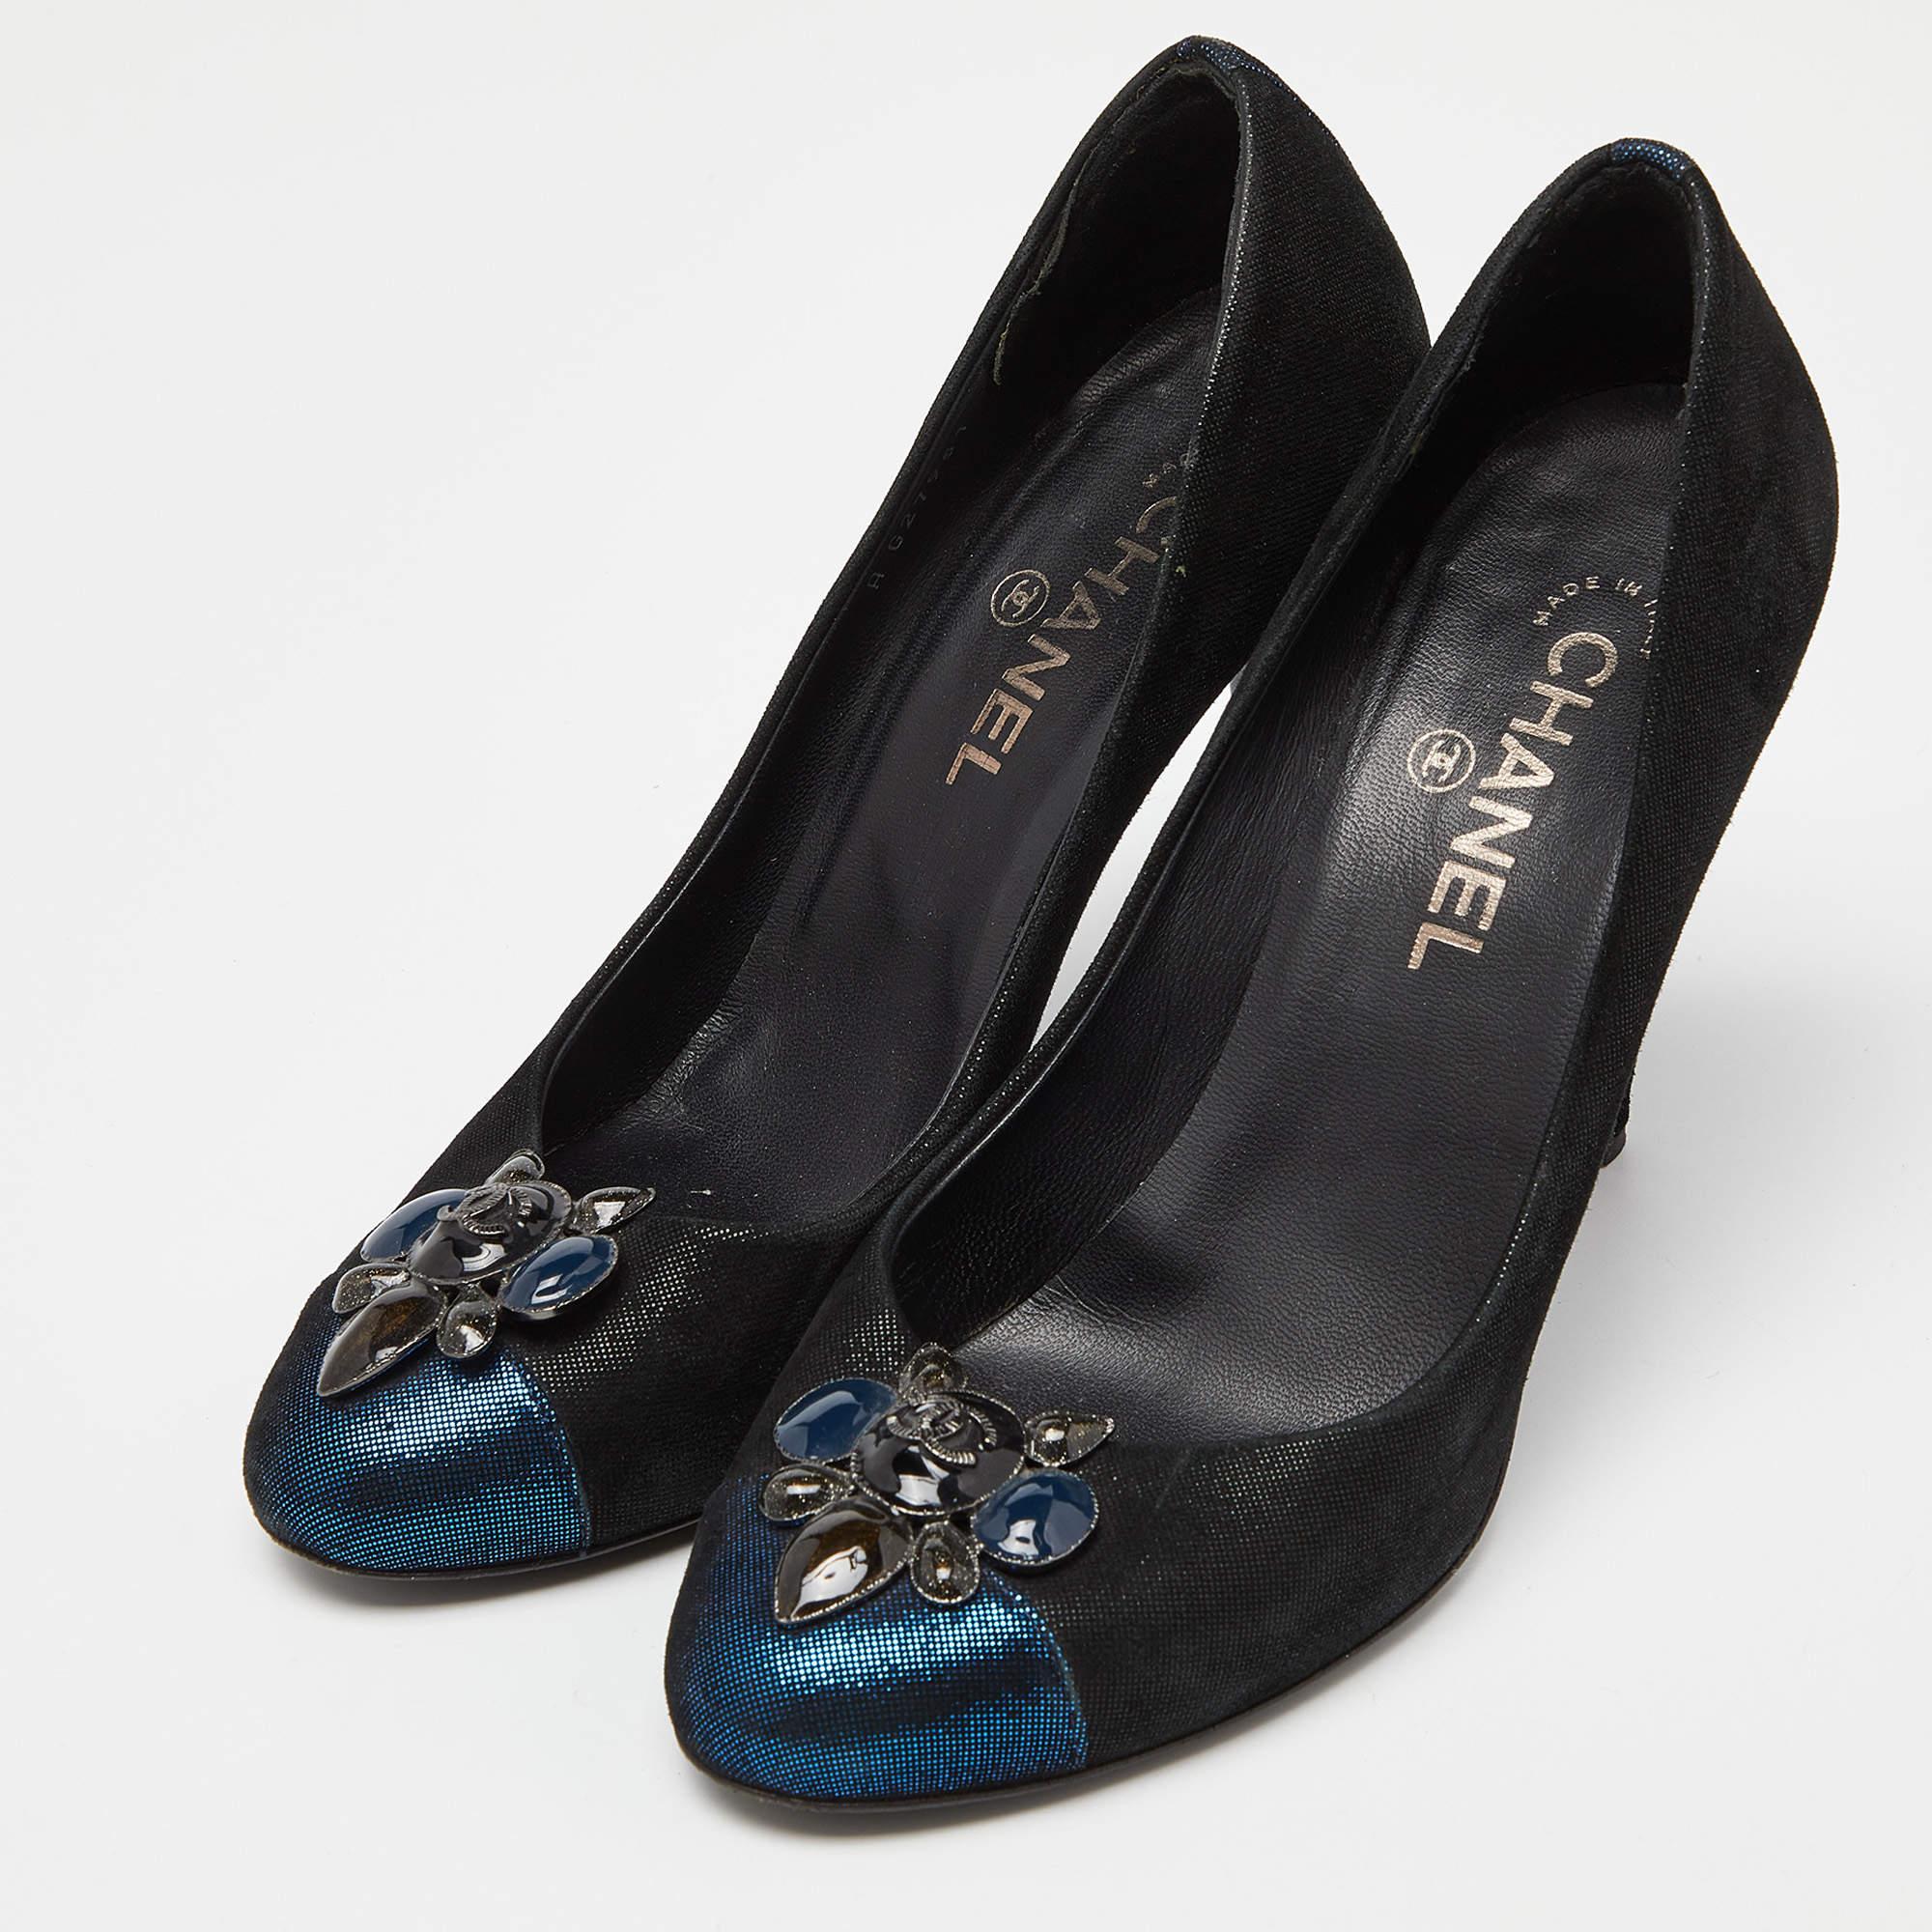 Crafted in classy hues, we love these Chanel pumps. Designed to make a statement, they have a sleek silhouette and a nice fit. Wear yours under maxi skirts for a peek of glamour, or let them shine with cropped hemlines.

